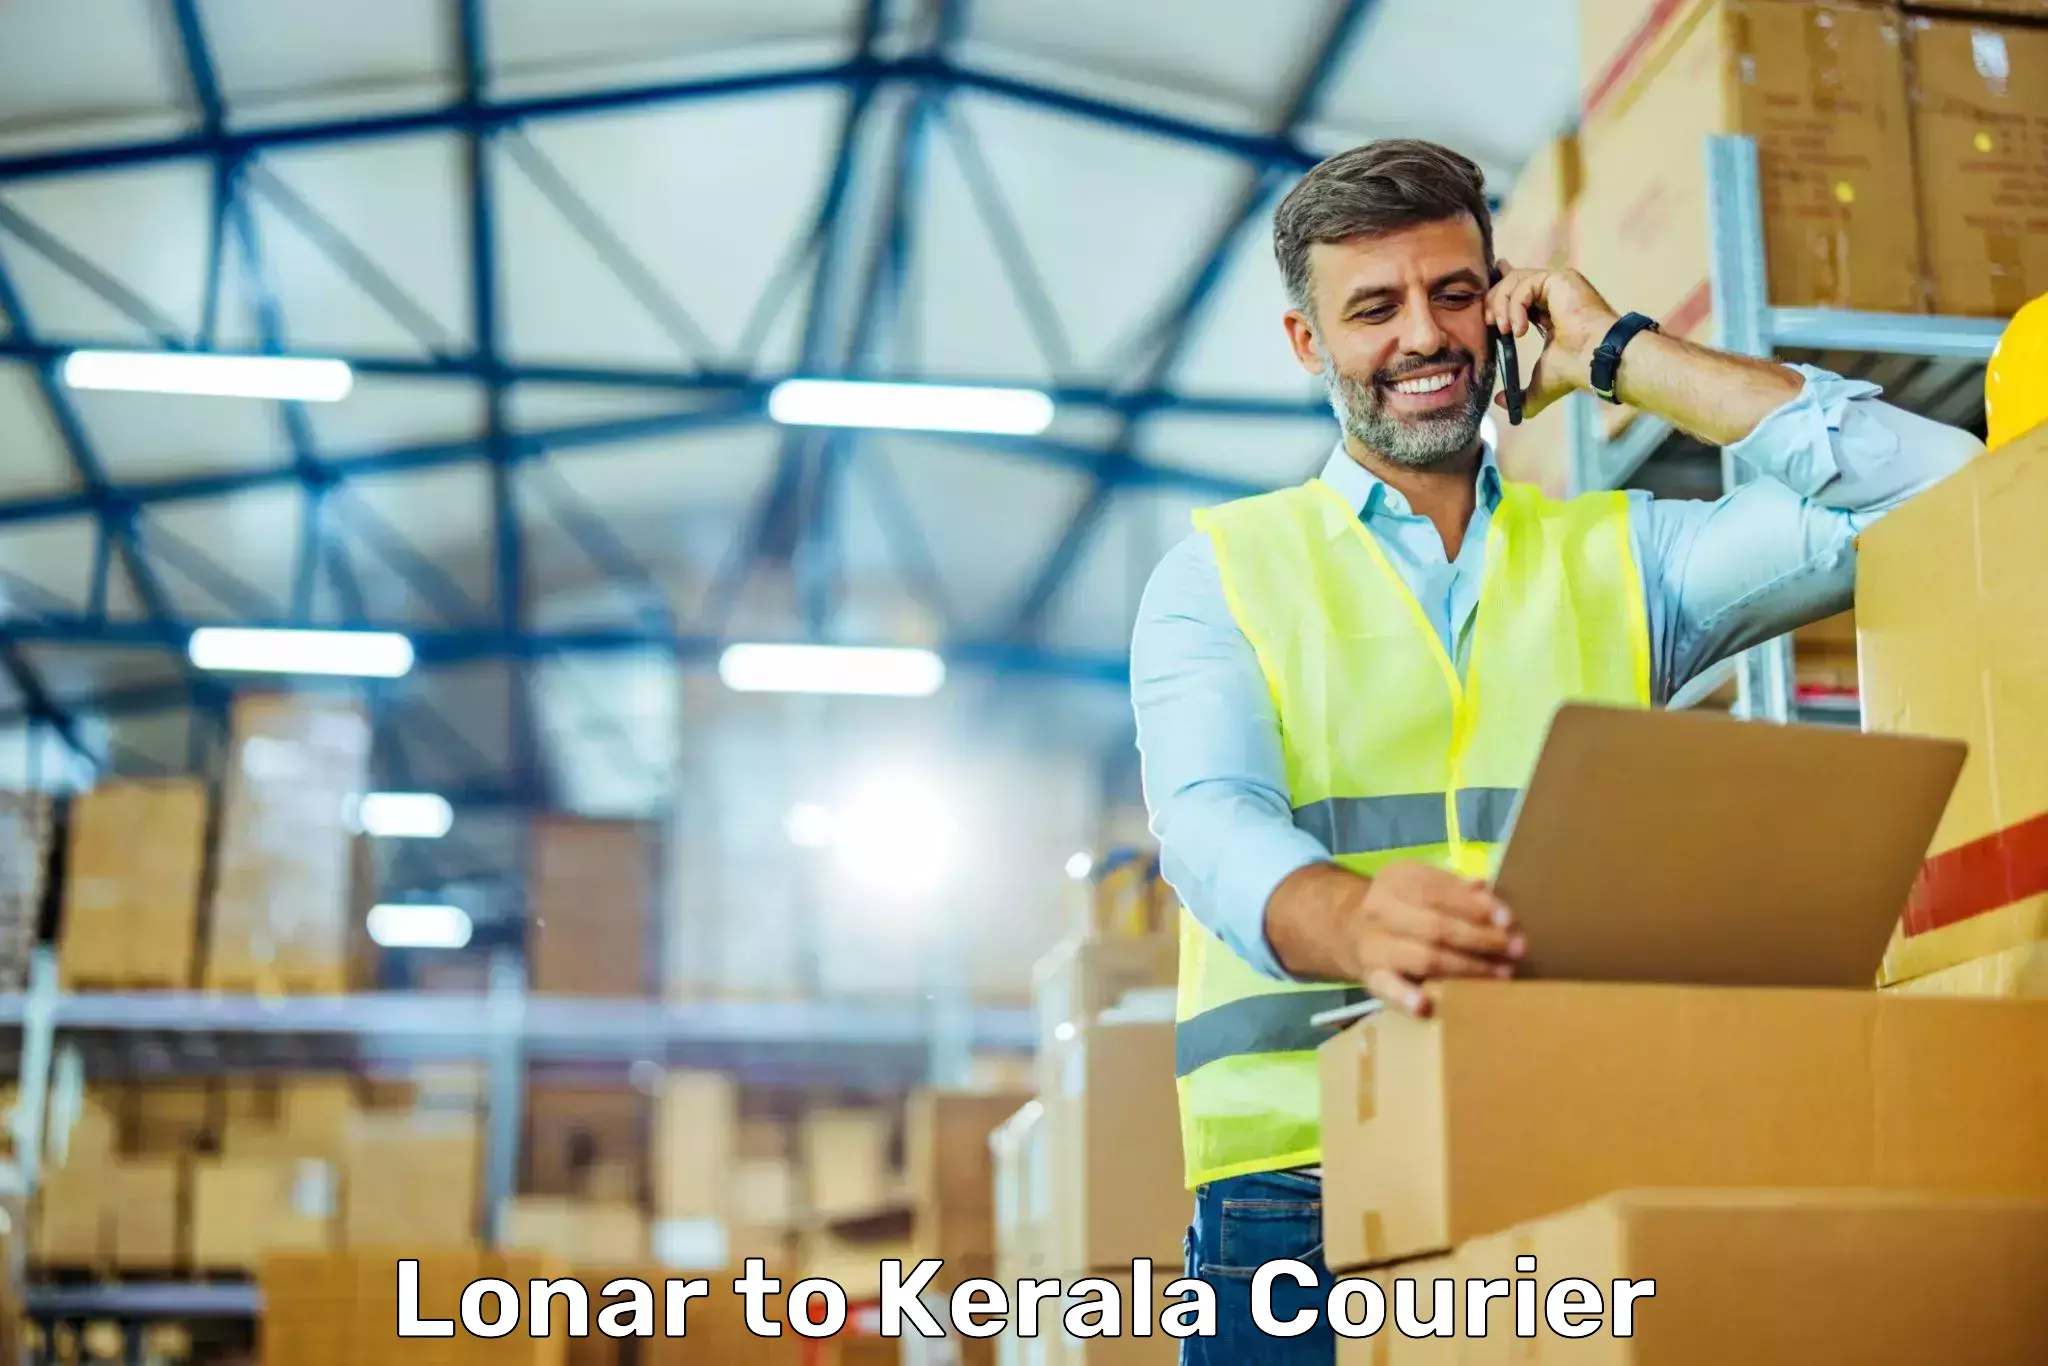 Courier service innovation Lonar to Kerala